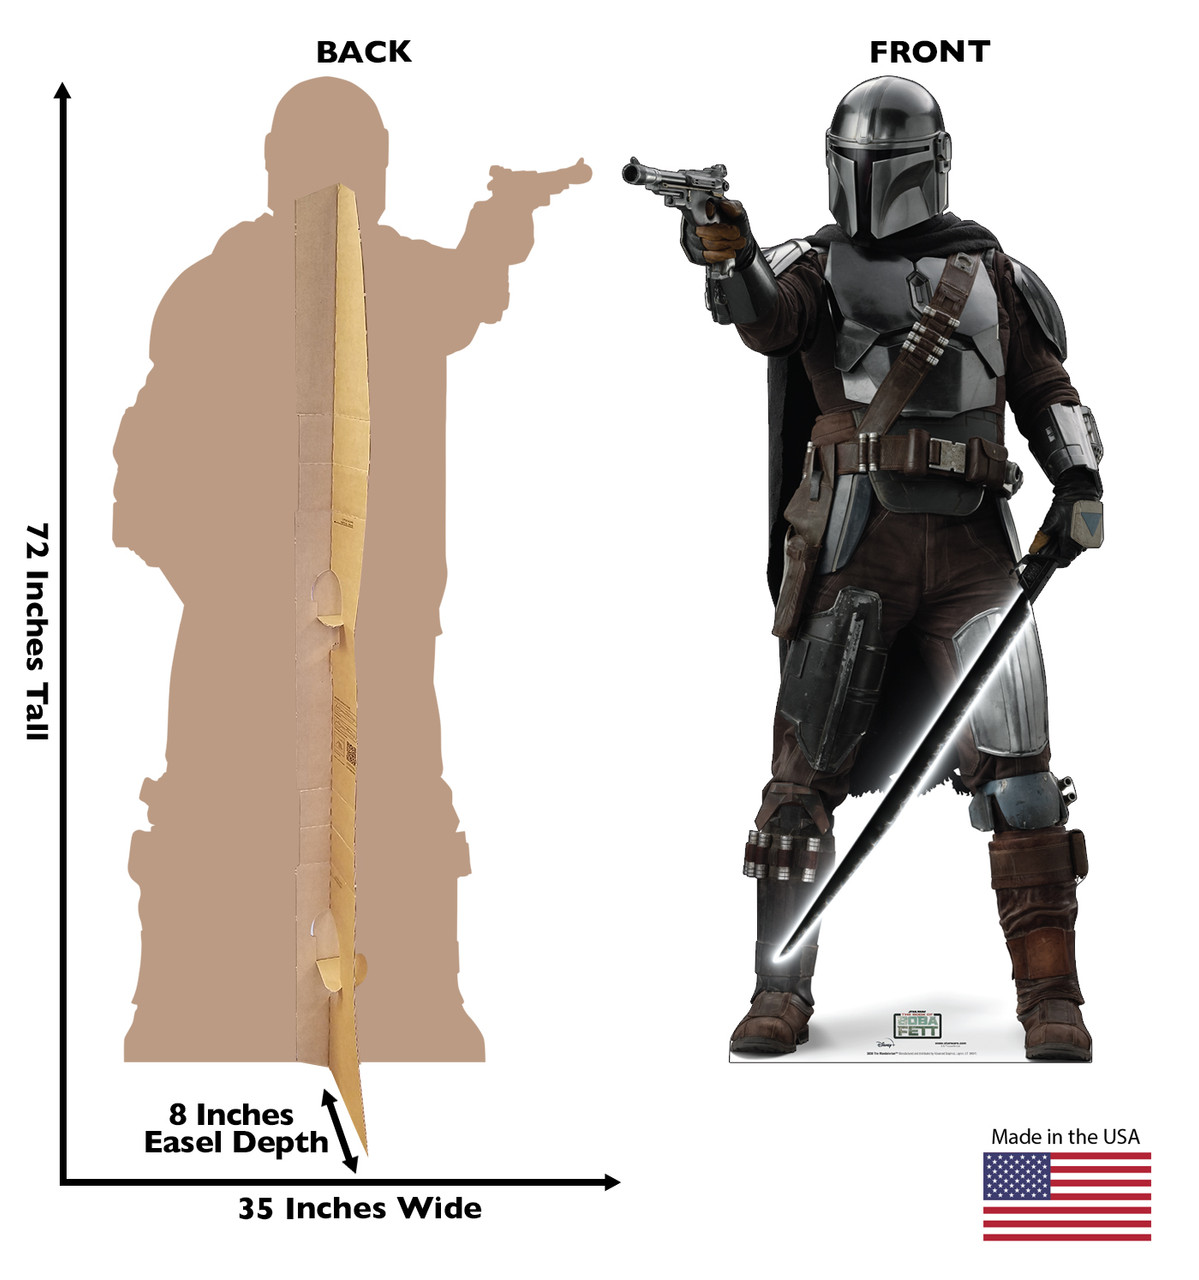 Life-size cardboard standee of The MandalorianTM from Lucas/Disney+ TV series The Book of Boba Fett with back and front dimensions.